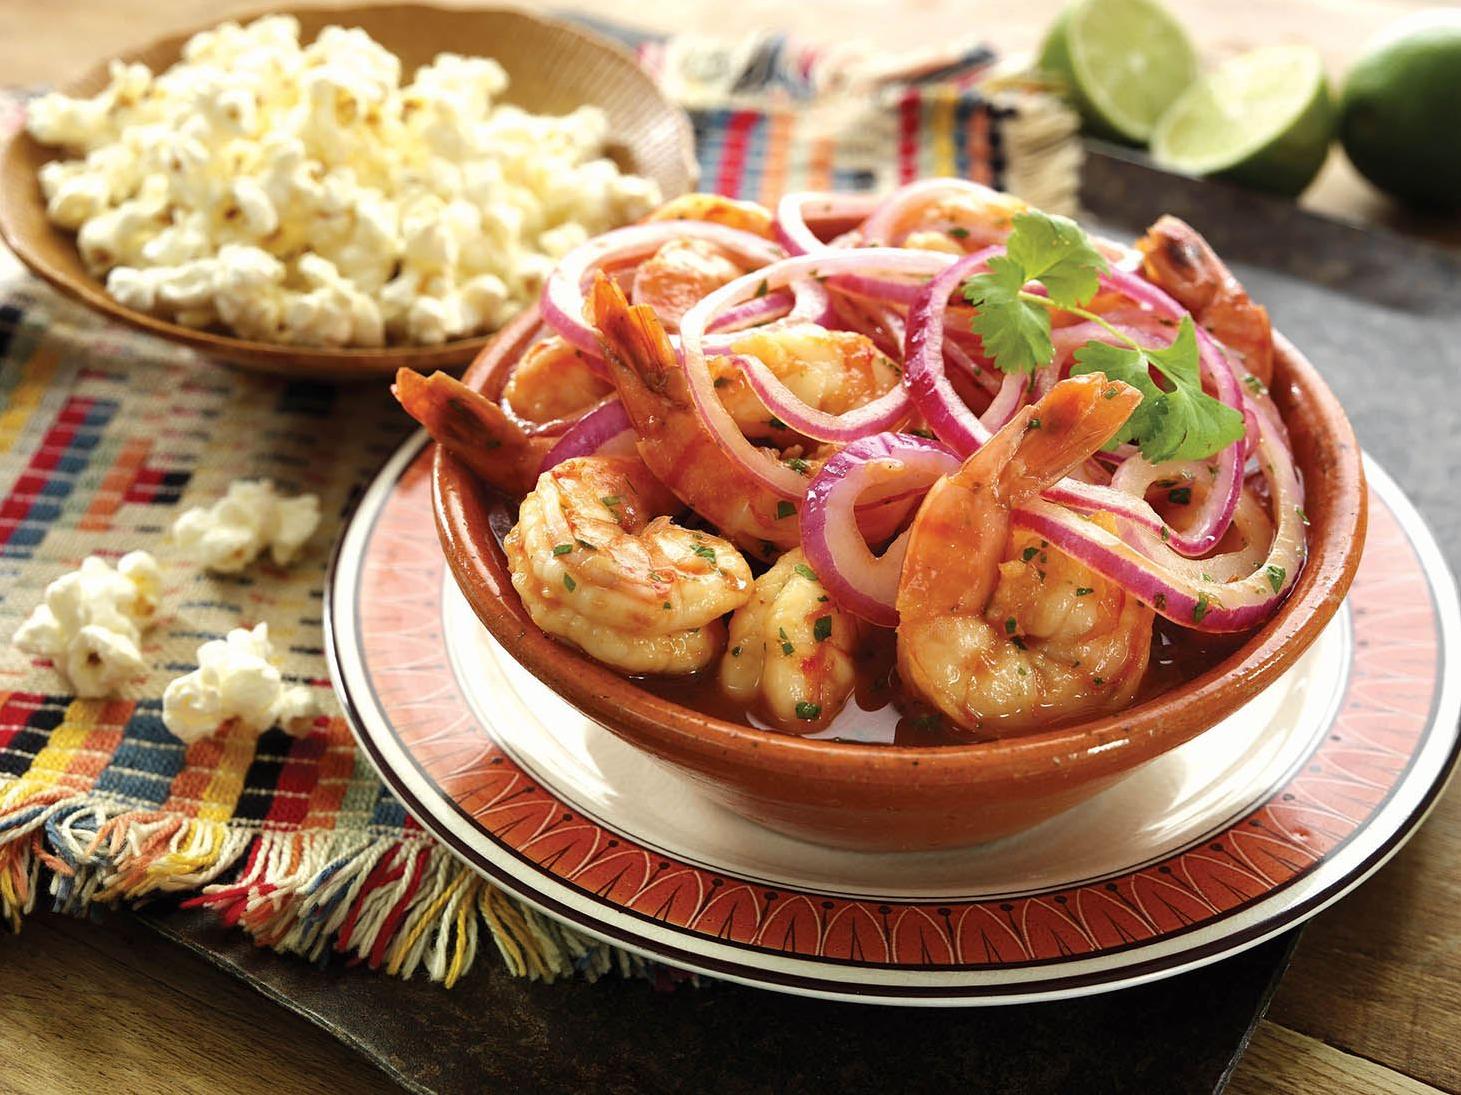  This dish is perfect for a hot summer day or when you're craving a light and flavorful meal.